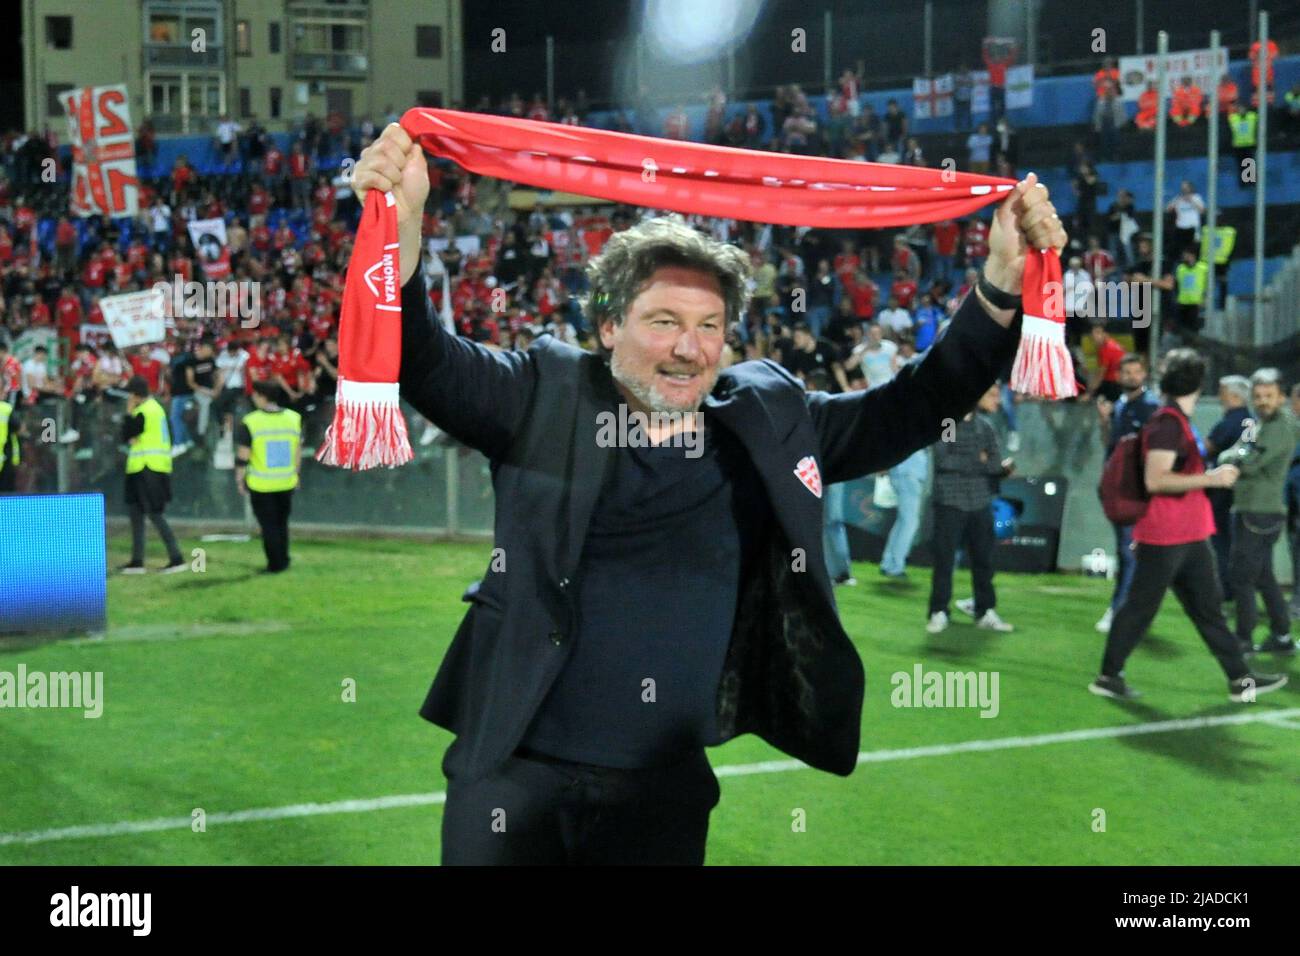 Pisa, Italy. 29th May, 2022. Head coach of Monza Giovanni Stroppa happiness at the end of the match during Play Off - AC Pisa vs AC Monza, Italian soccer Serie B match in Pisa, Italy, May 29 2022 Credit: Independent Photo Agency/Alamy Live News Stock Photo